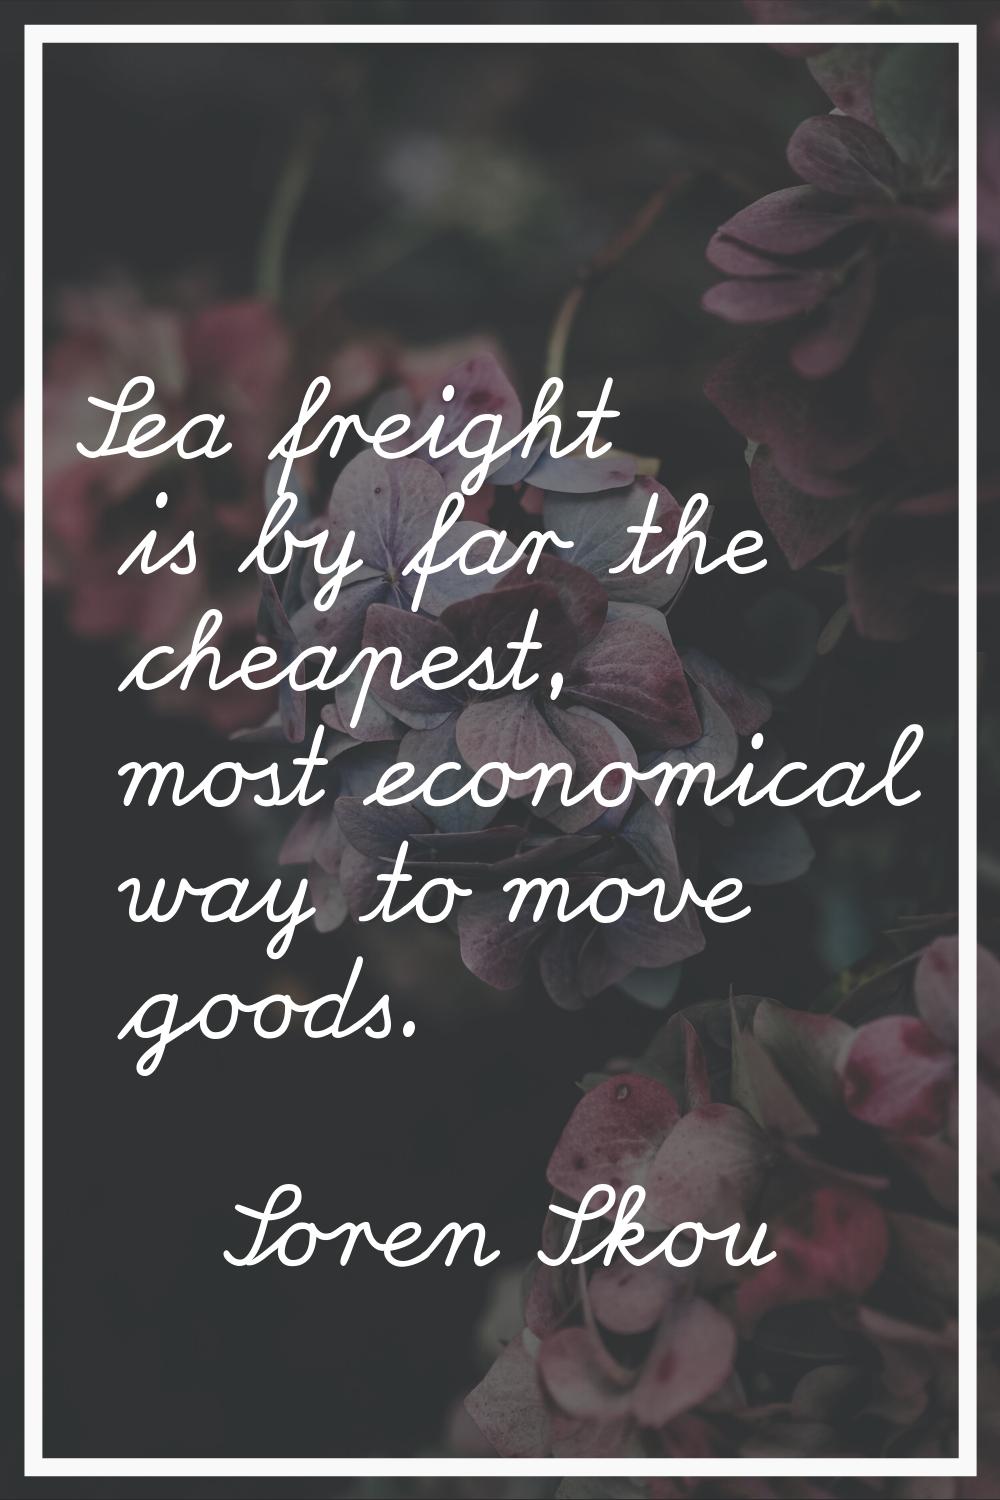 Sea freight is by far the cheapest, most economical way to move goods.